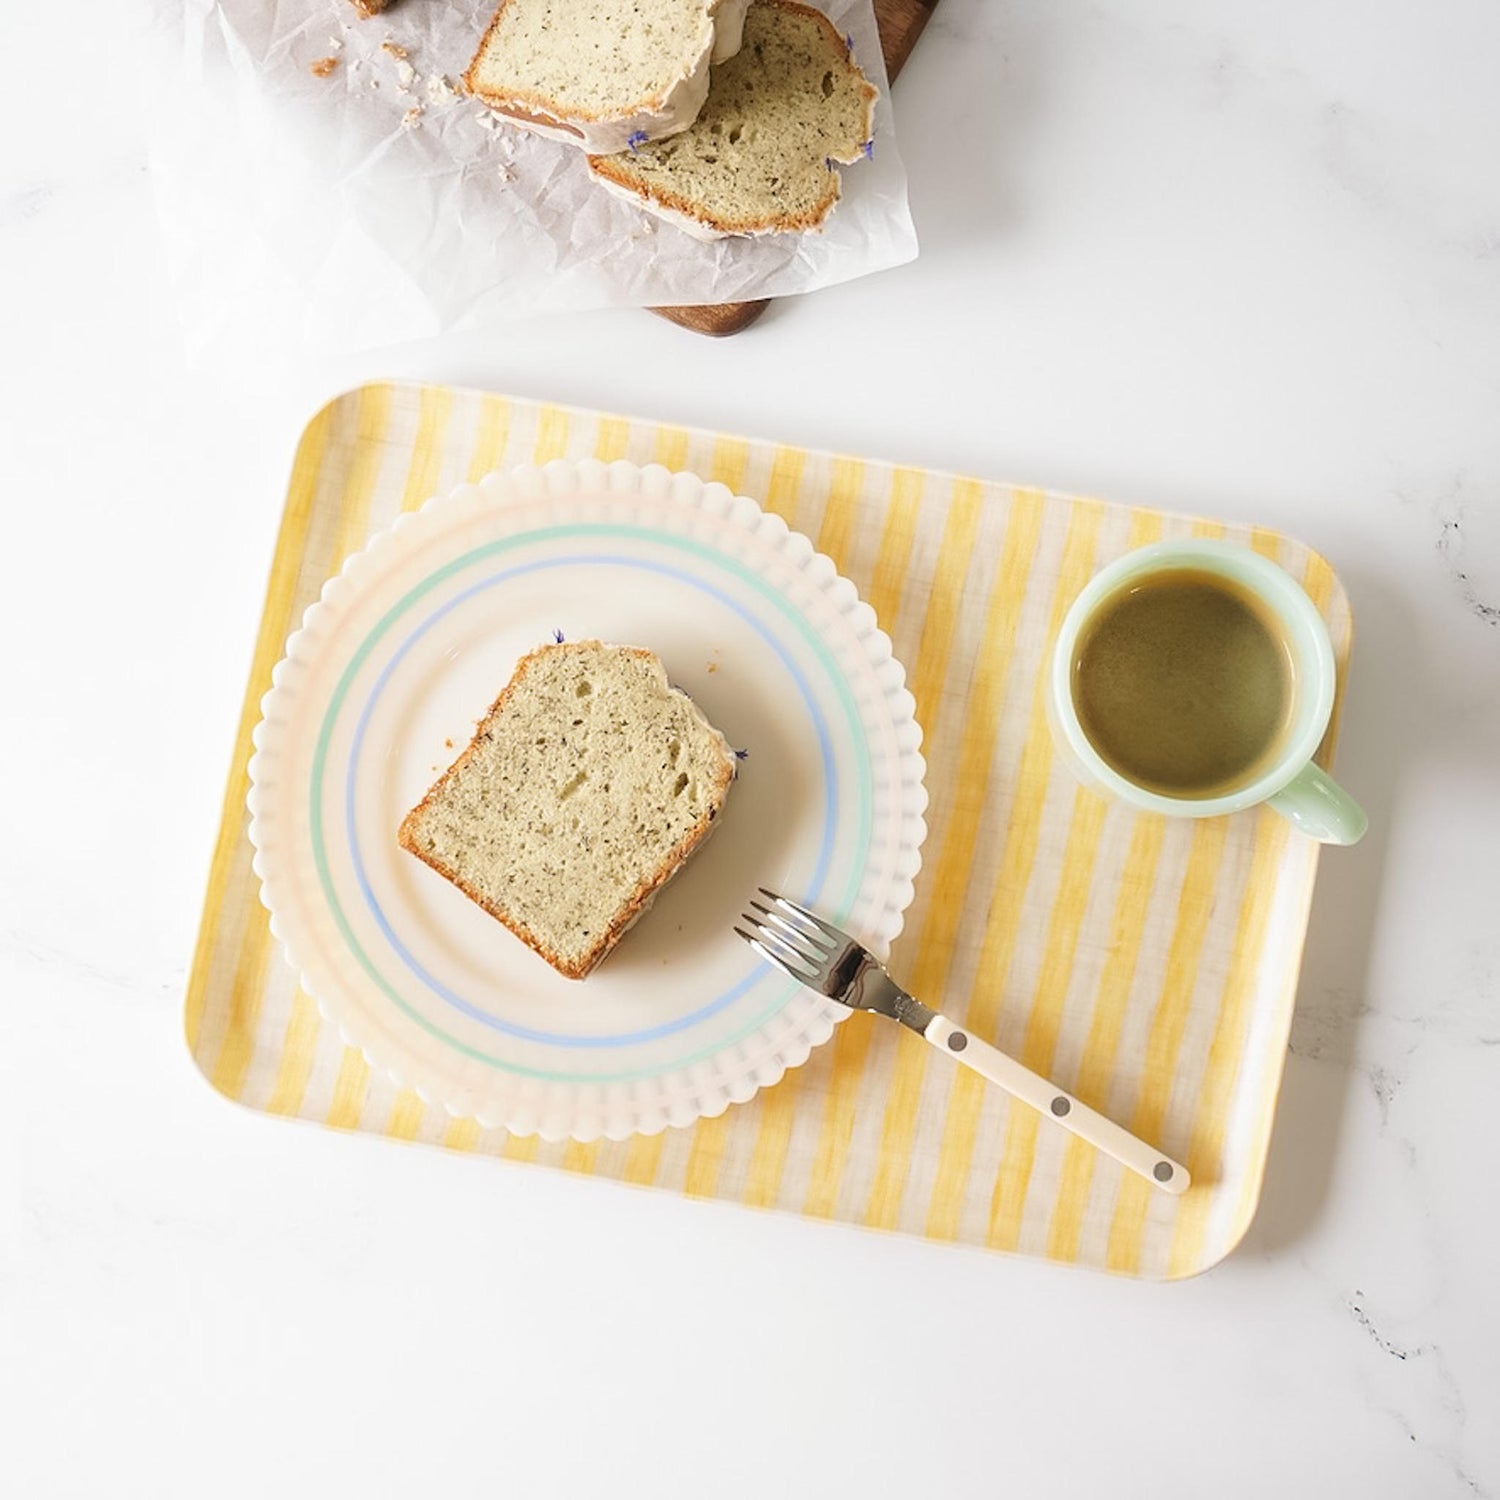 pound cake and coffee on a serving tray